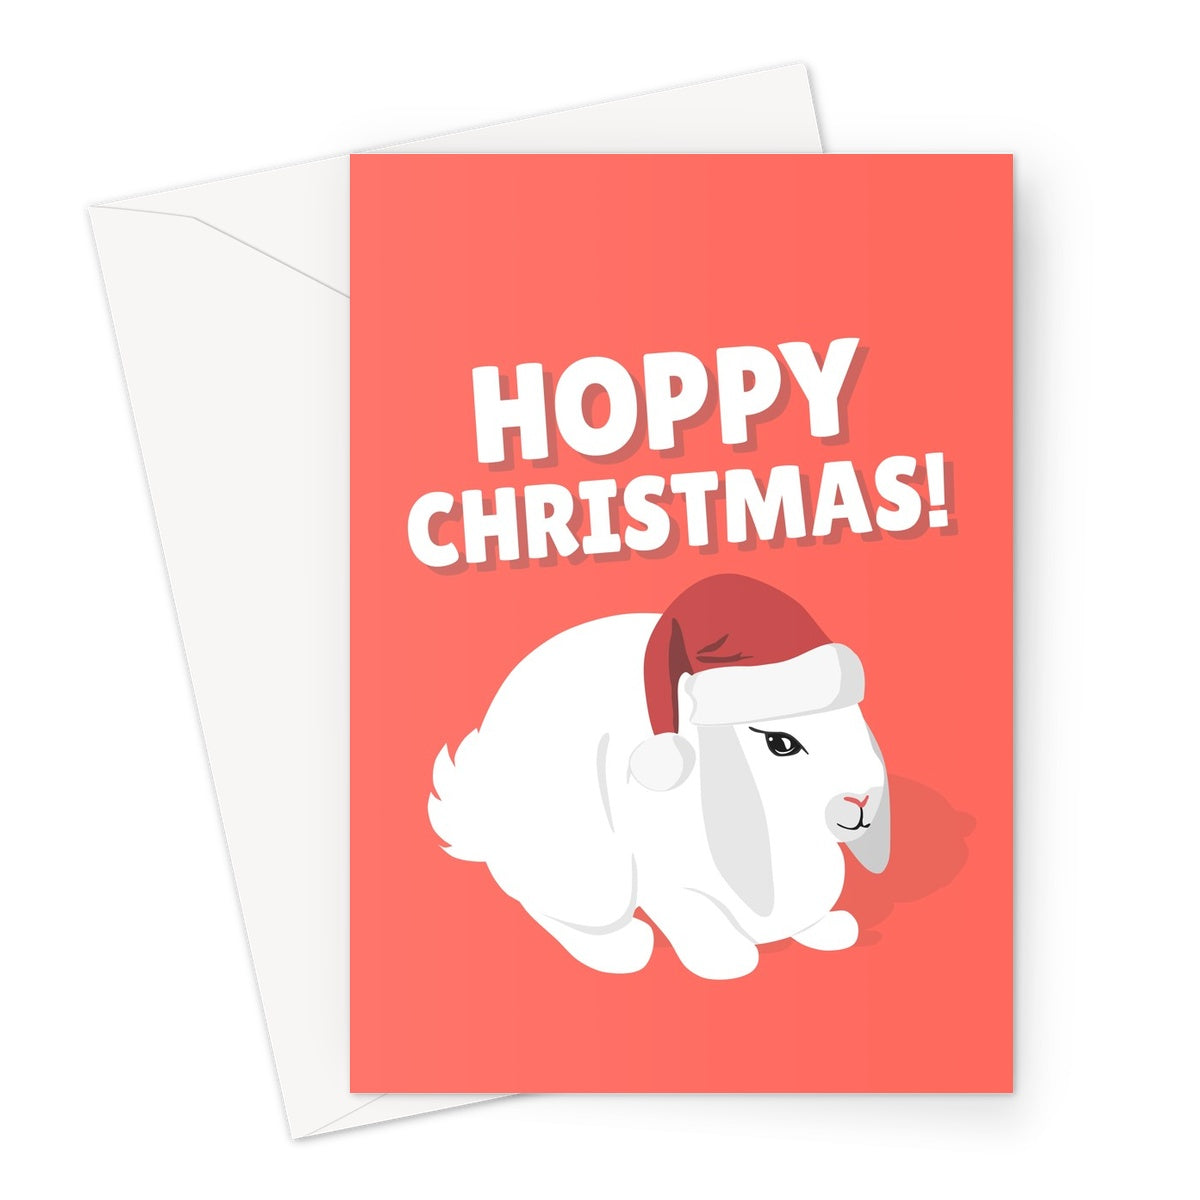 Hoppy Christmas Bunny Rabbit Cute Pet Owner From The Pun Happy Xmas Greeting Card